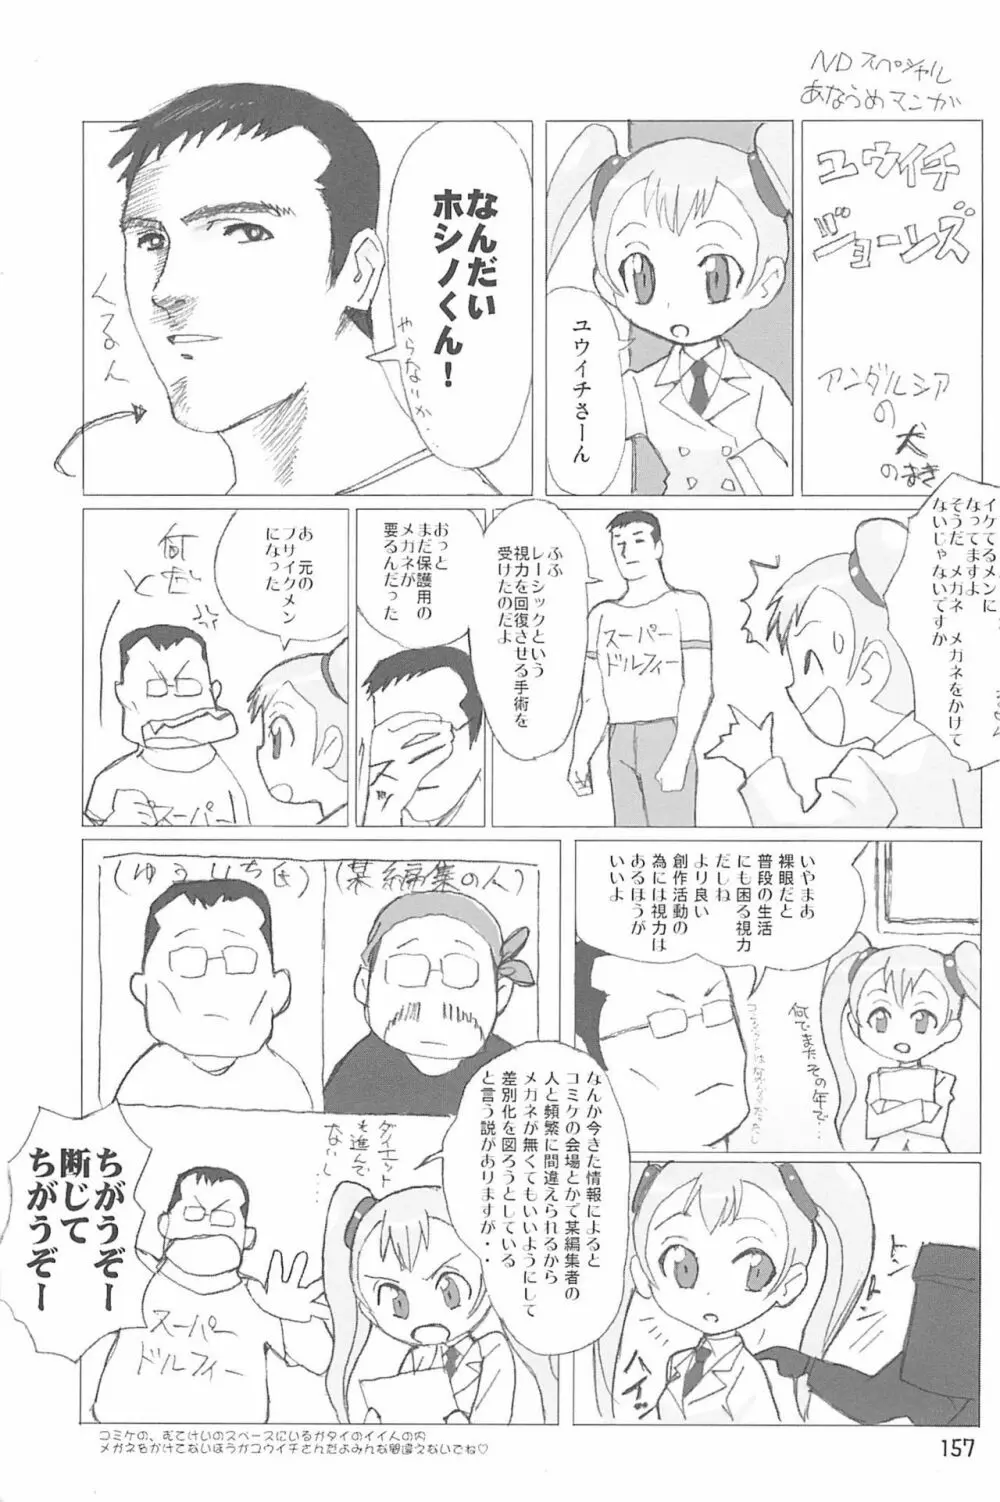 ND-special Volume 4 157ページ